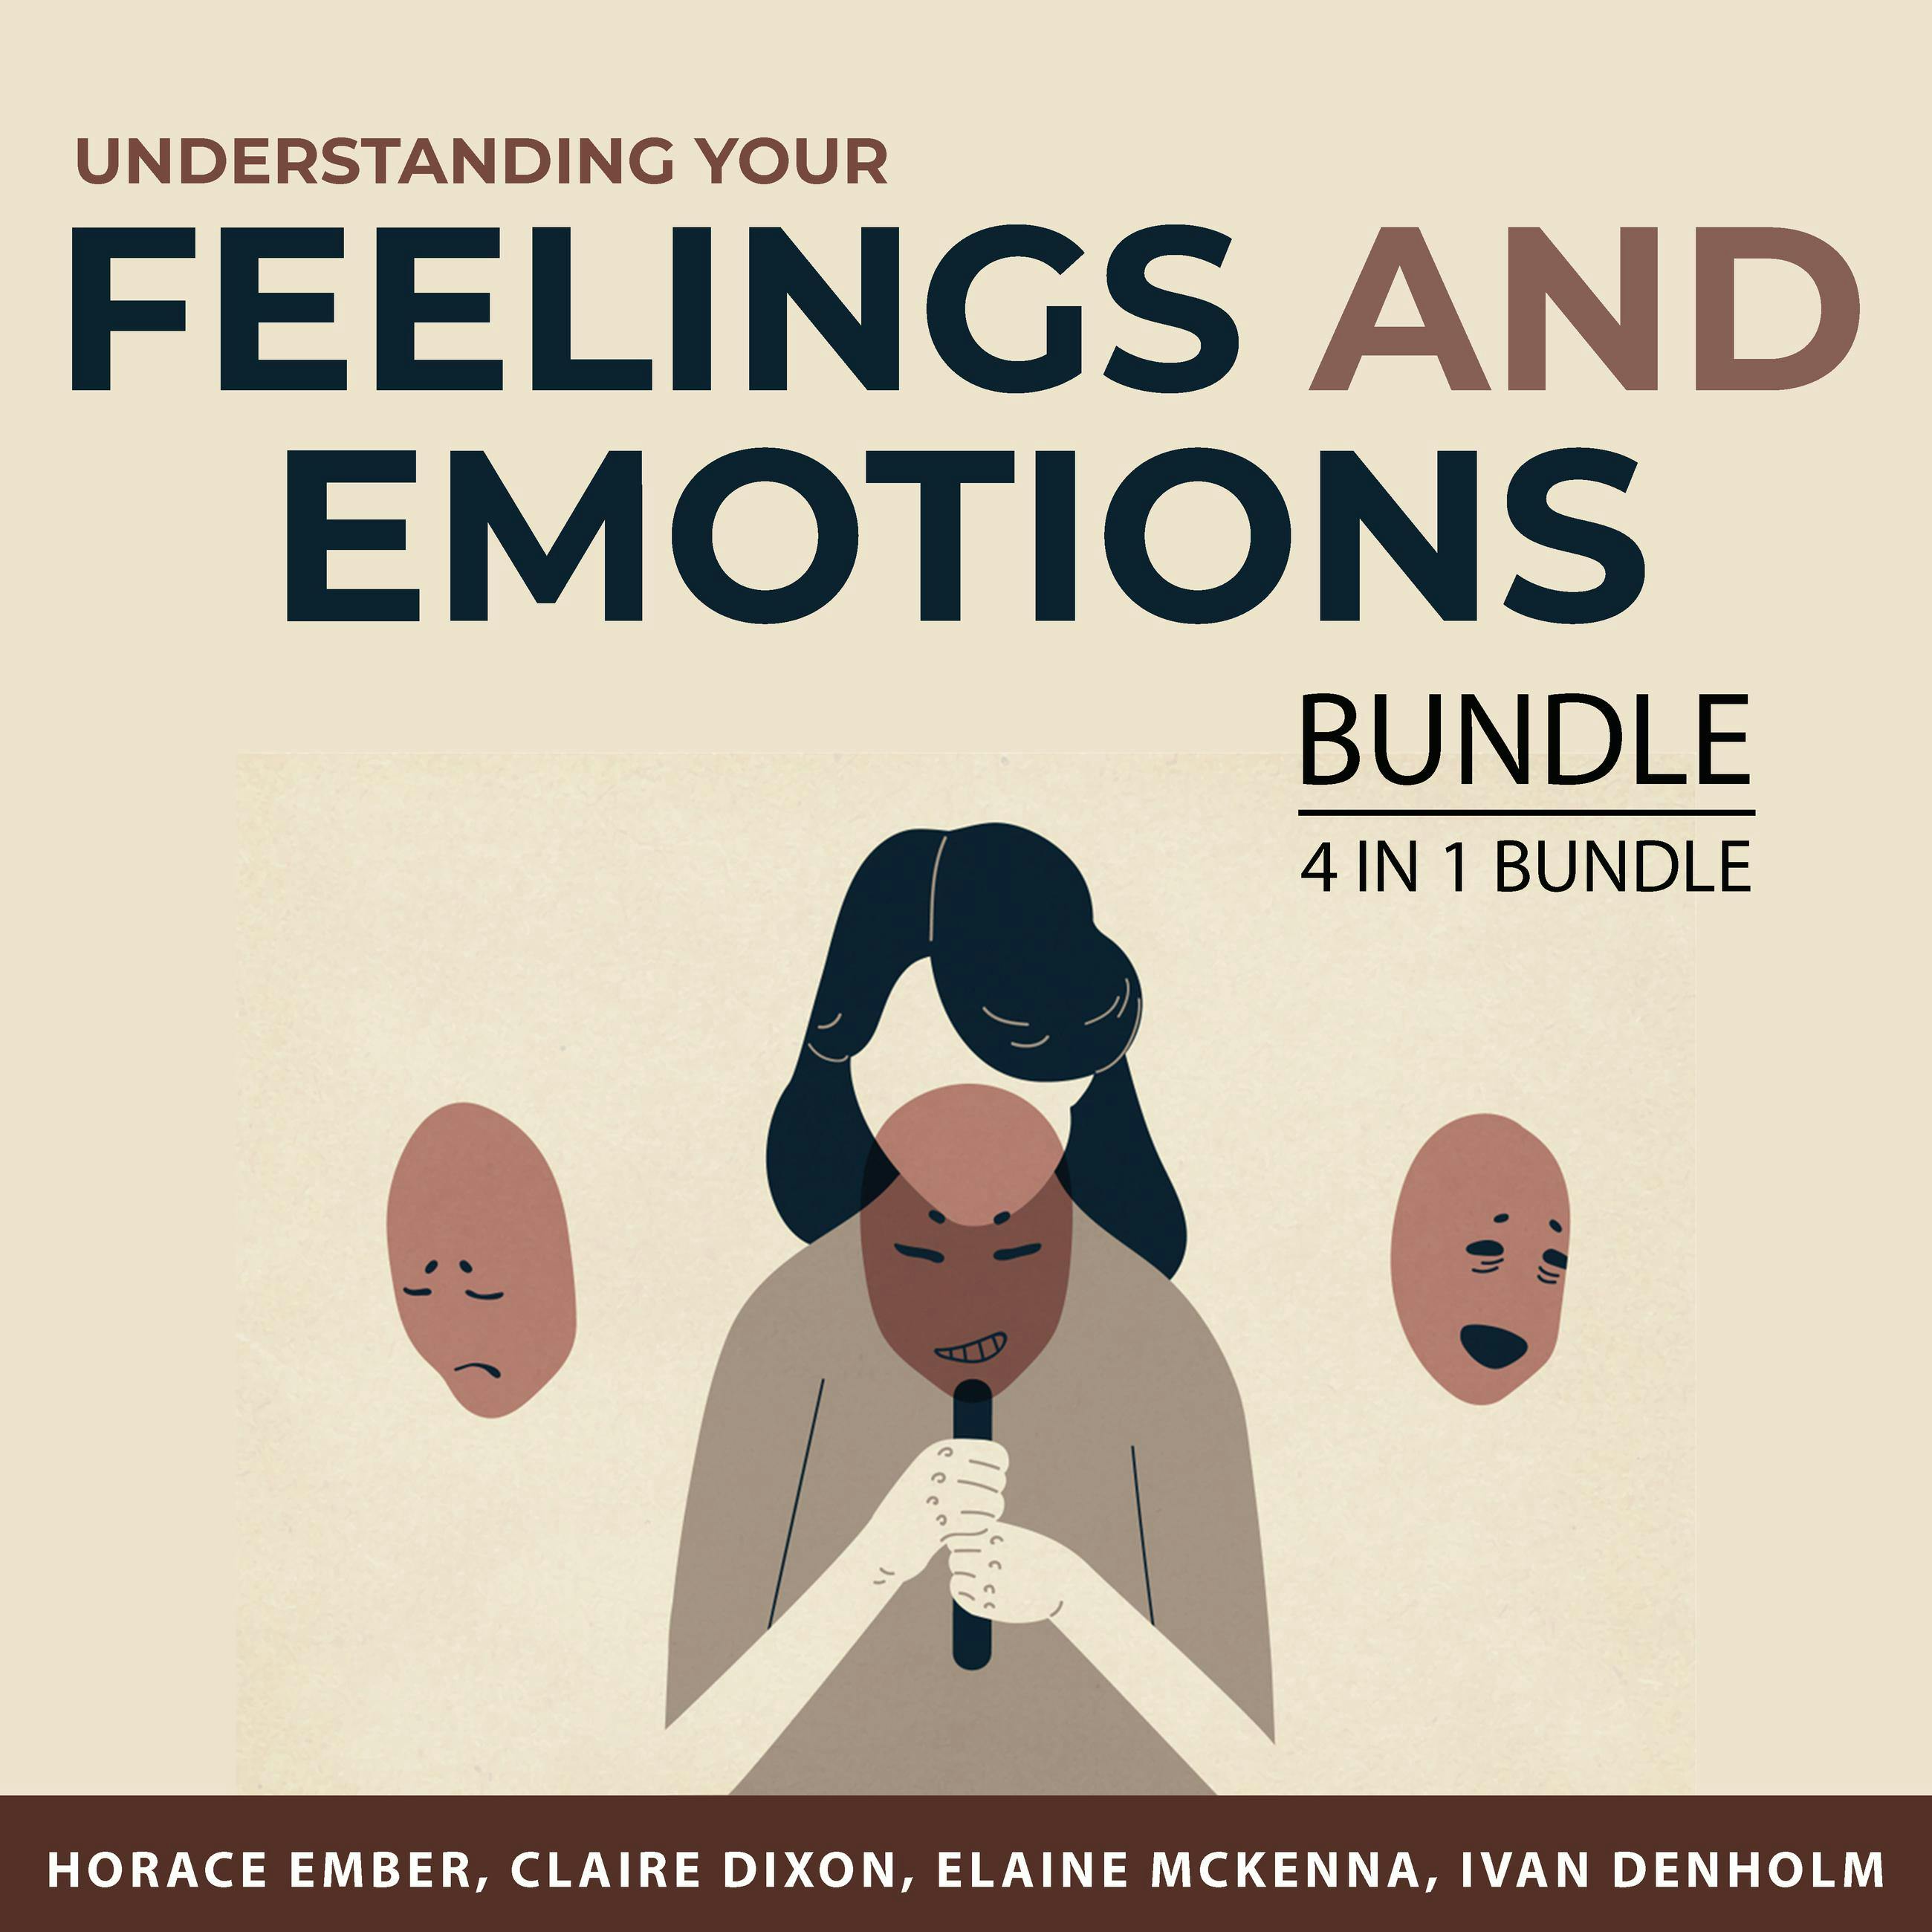 Understanding Your Feelings and Emotions Bundle, 4 in 1 Bundle: Say Goodbye to Your Anger, How to Feel Good, Emotional Intelligence Mastery, and Master Your Feelings - undefined